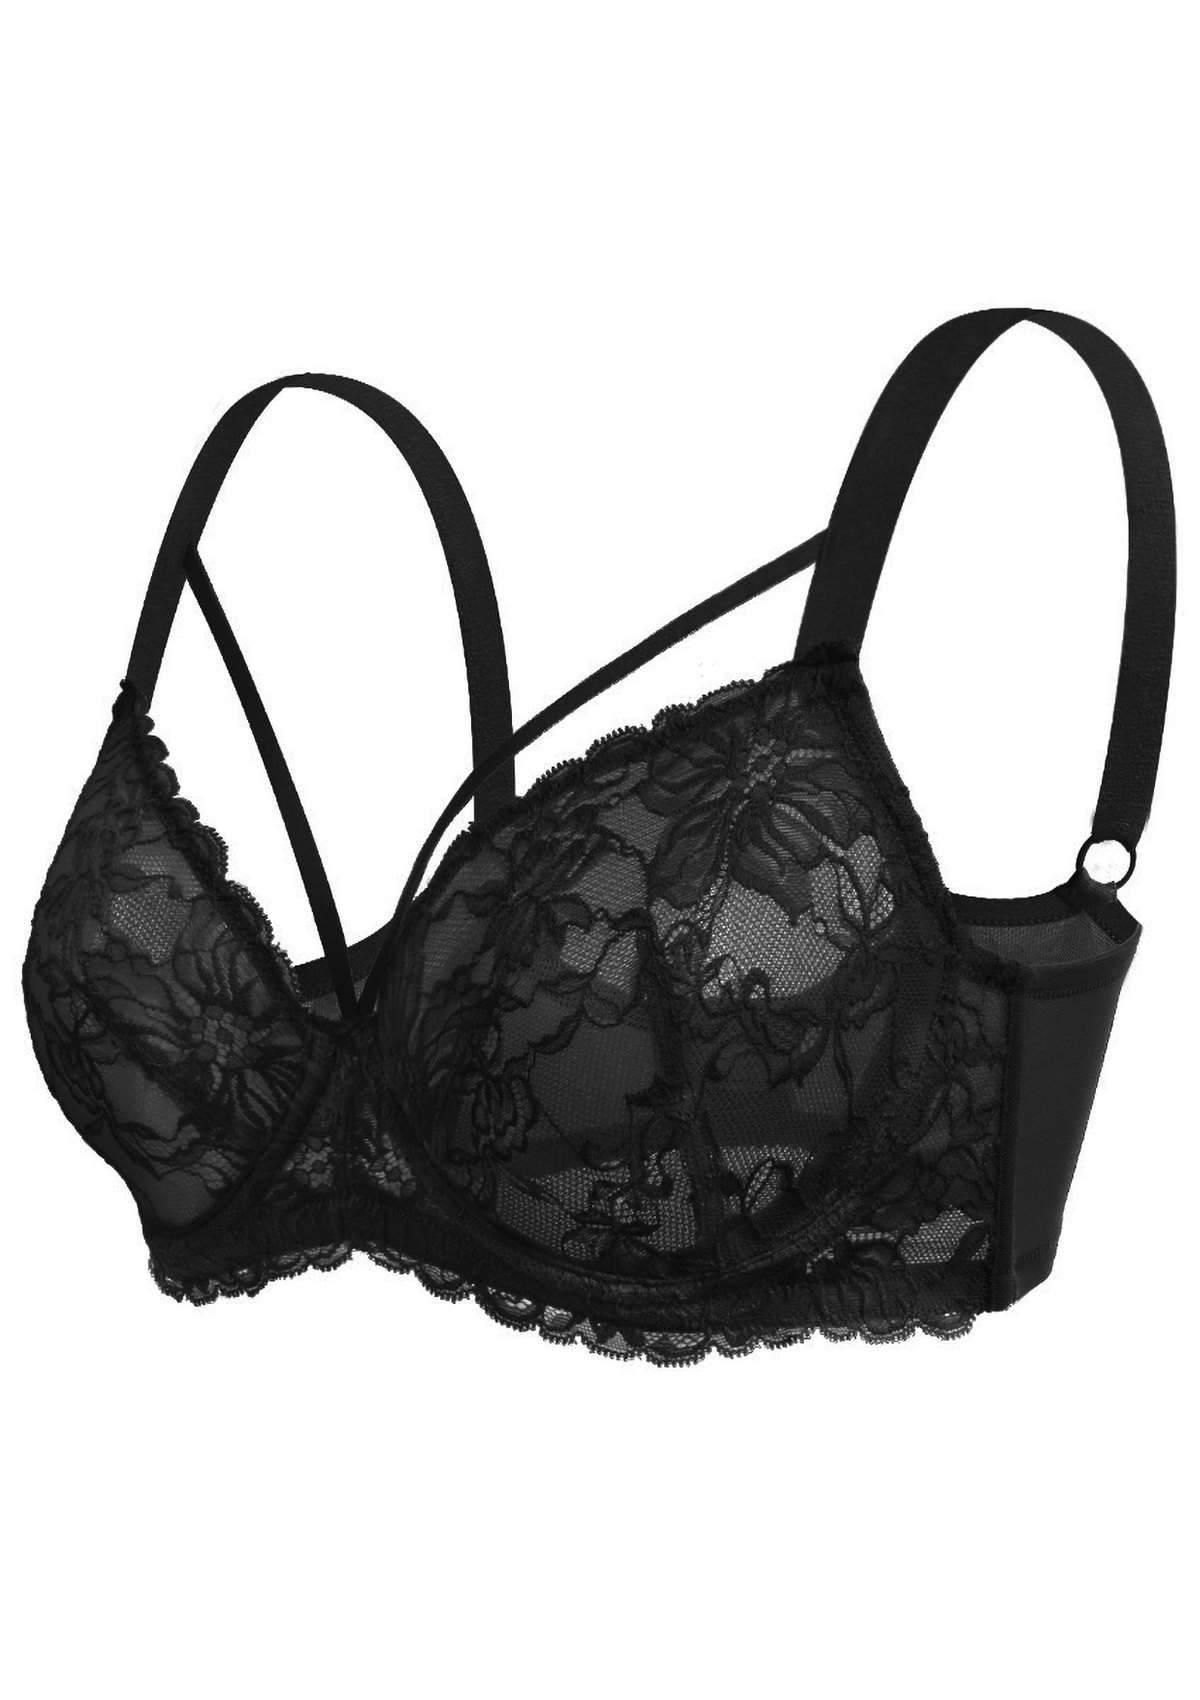 HSIA Pretty In Petals Bra - Plus Size Lingerie For Comfrot And Support - Black / 34 / G